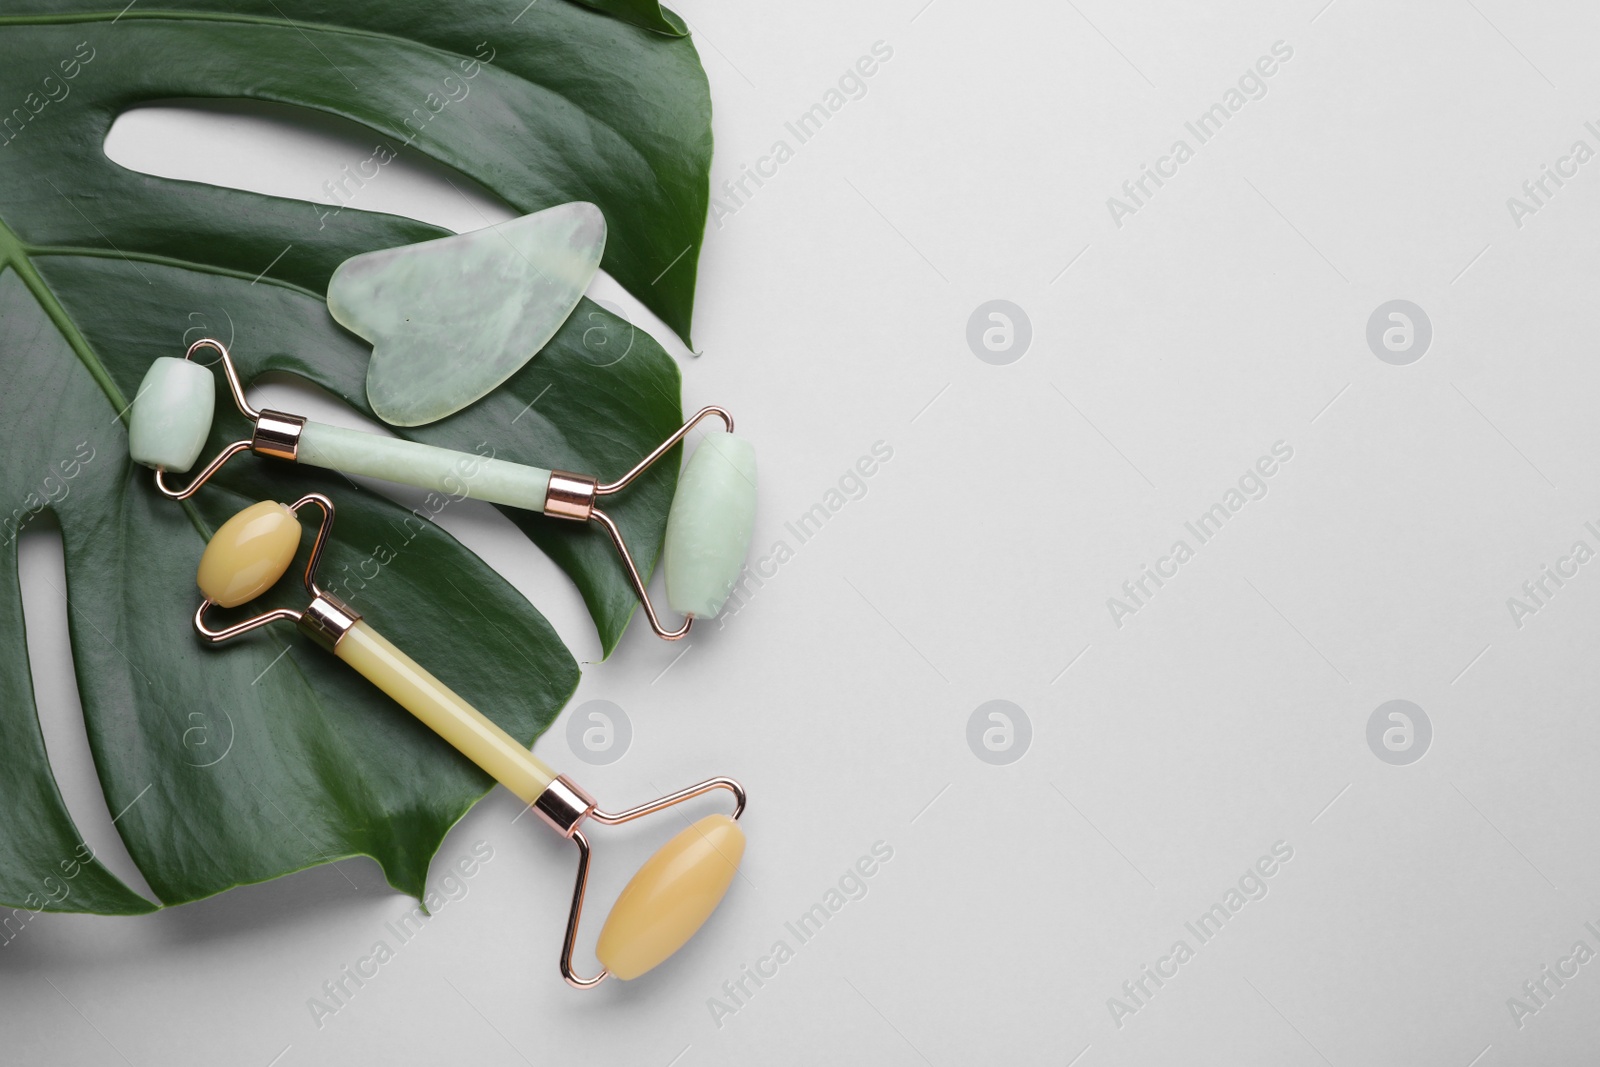 Photo of Gua sha stone, different face rollers and monstera leaf on light background, flat lay. Space for text